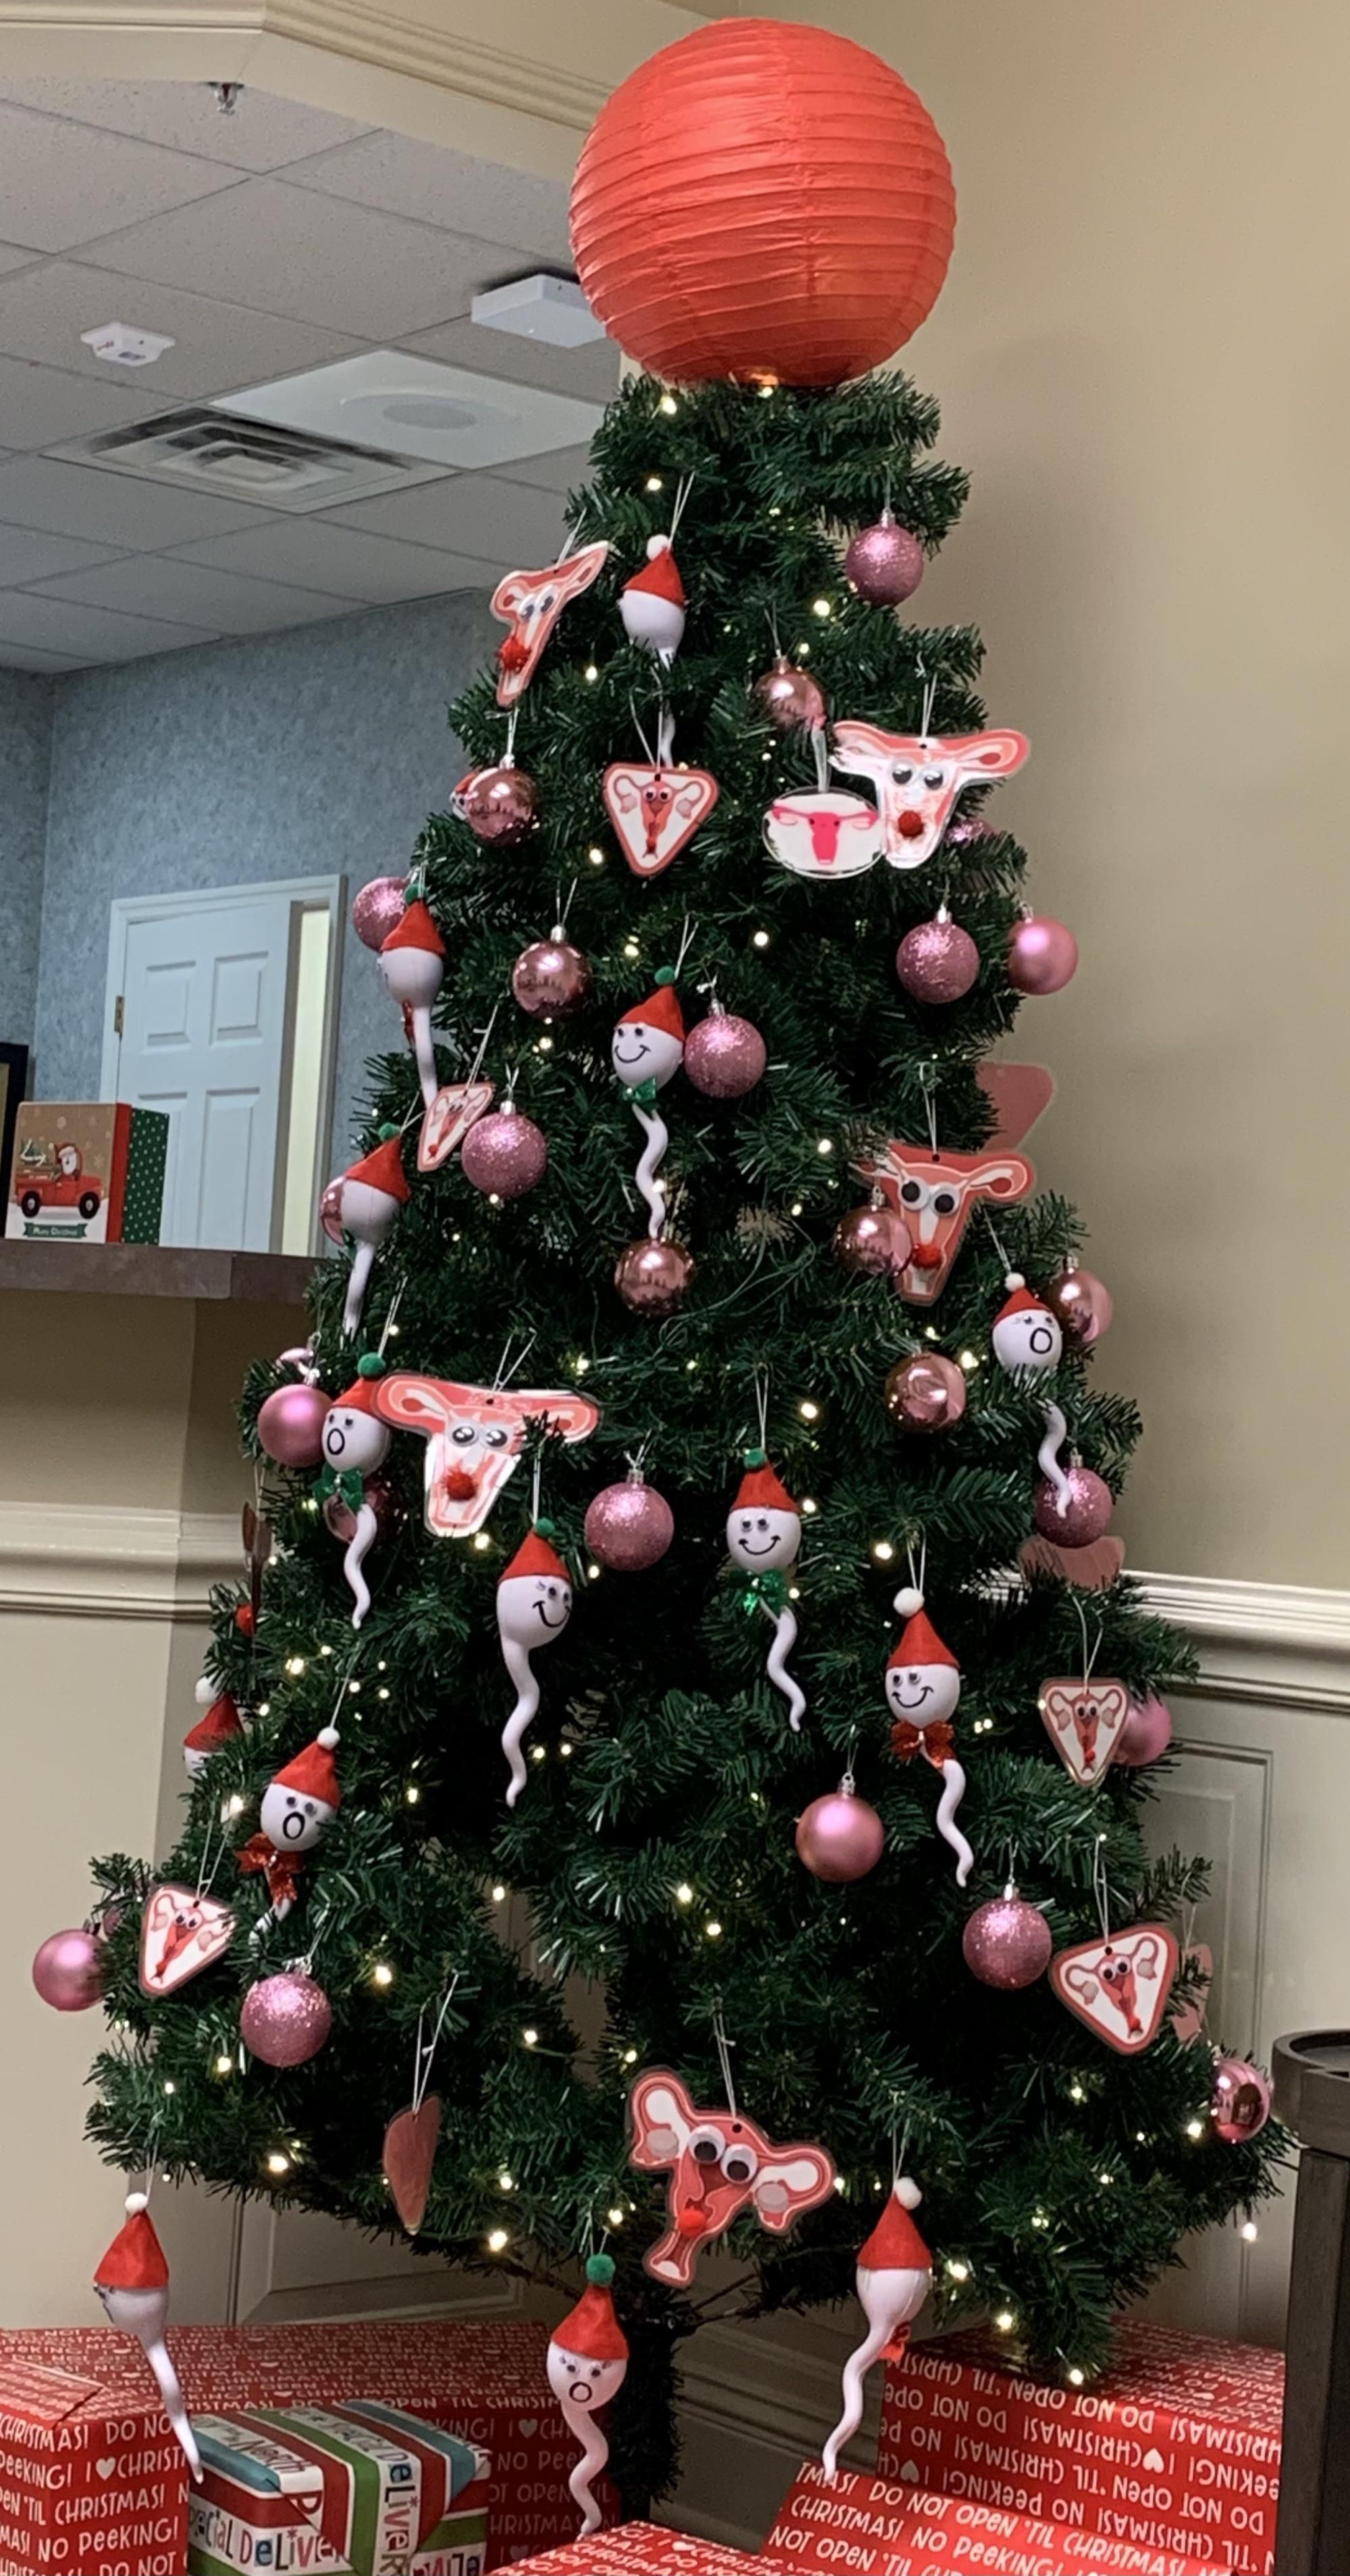 The Christmas tree at my OBGYNs office…